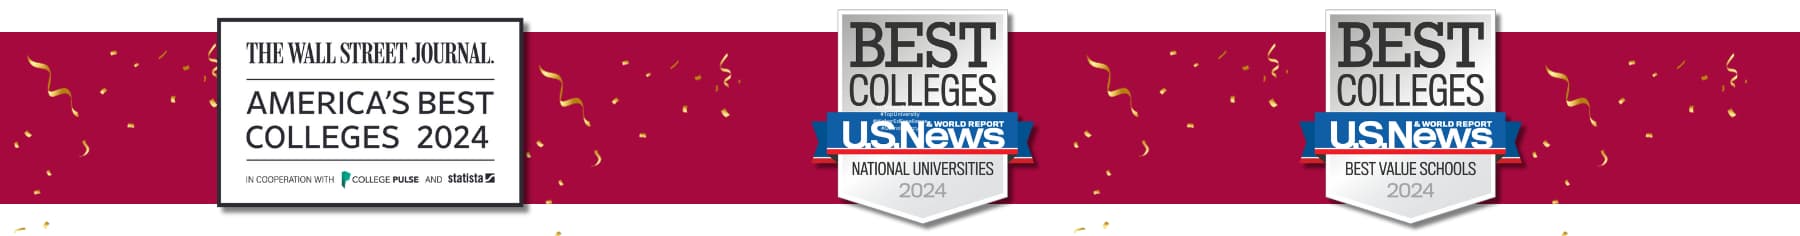 Image showing Wall Street Journal Rankings Badge and US News & World Report Rankings Badges for National Universities and Best Value Universities